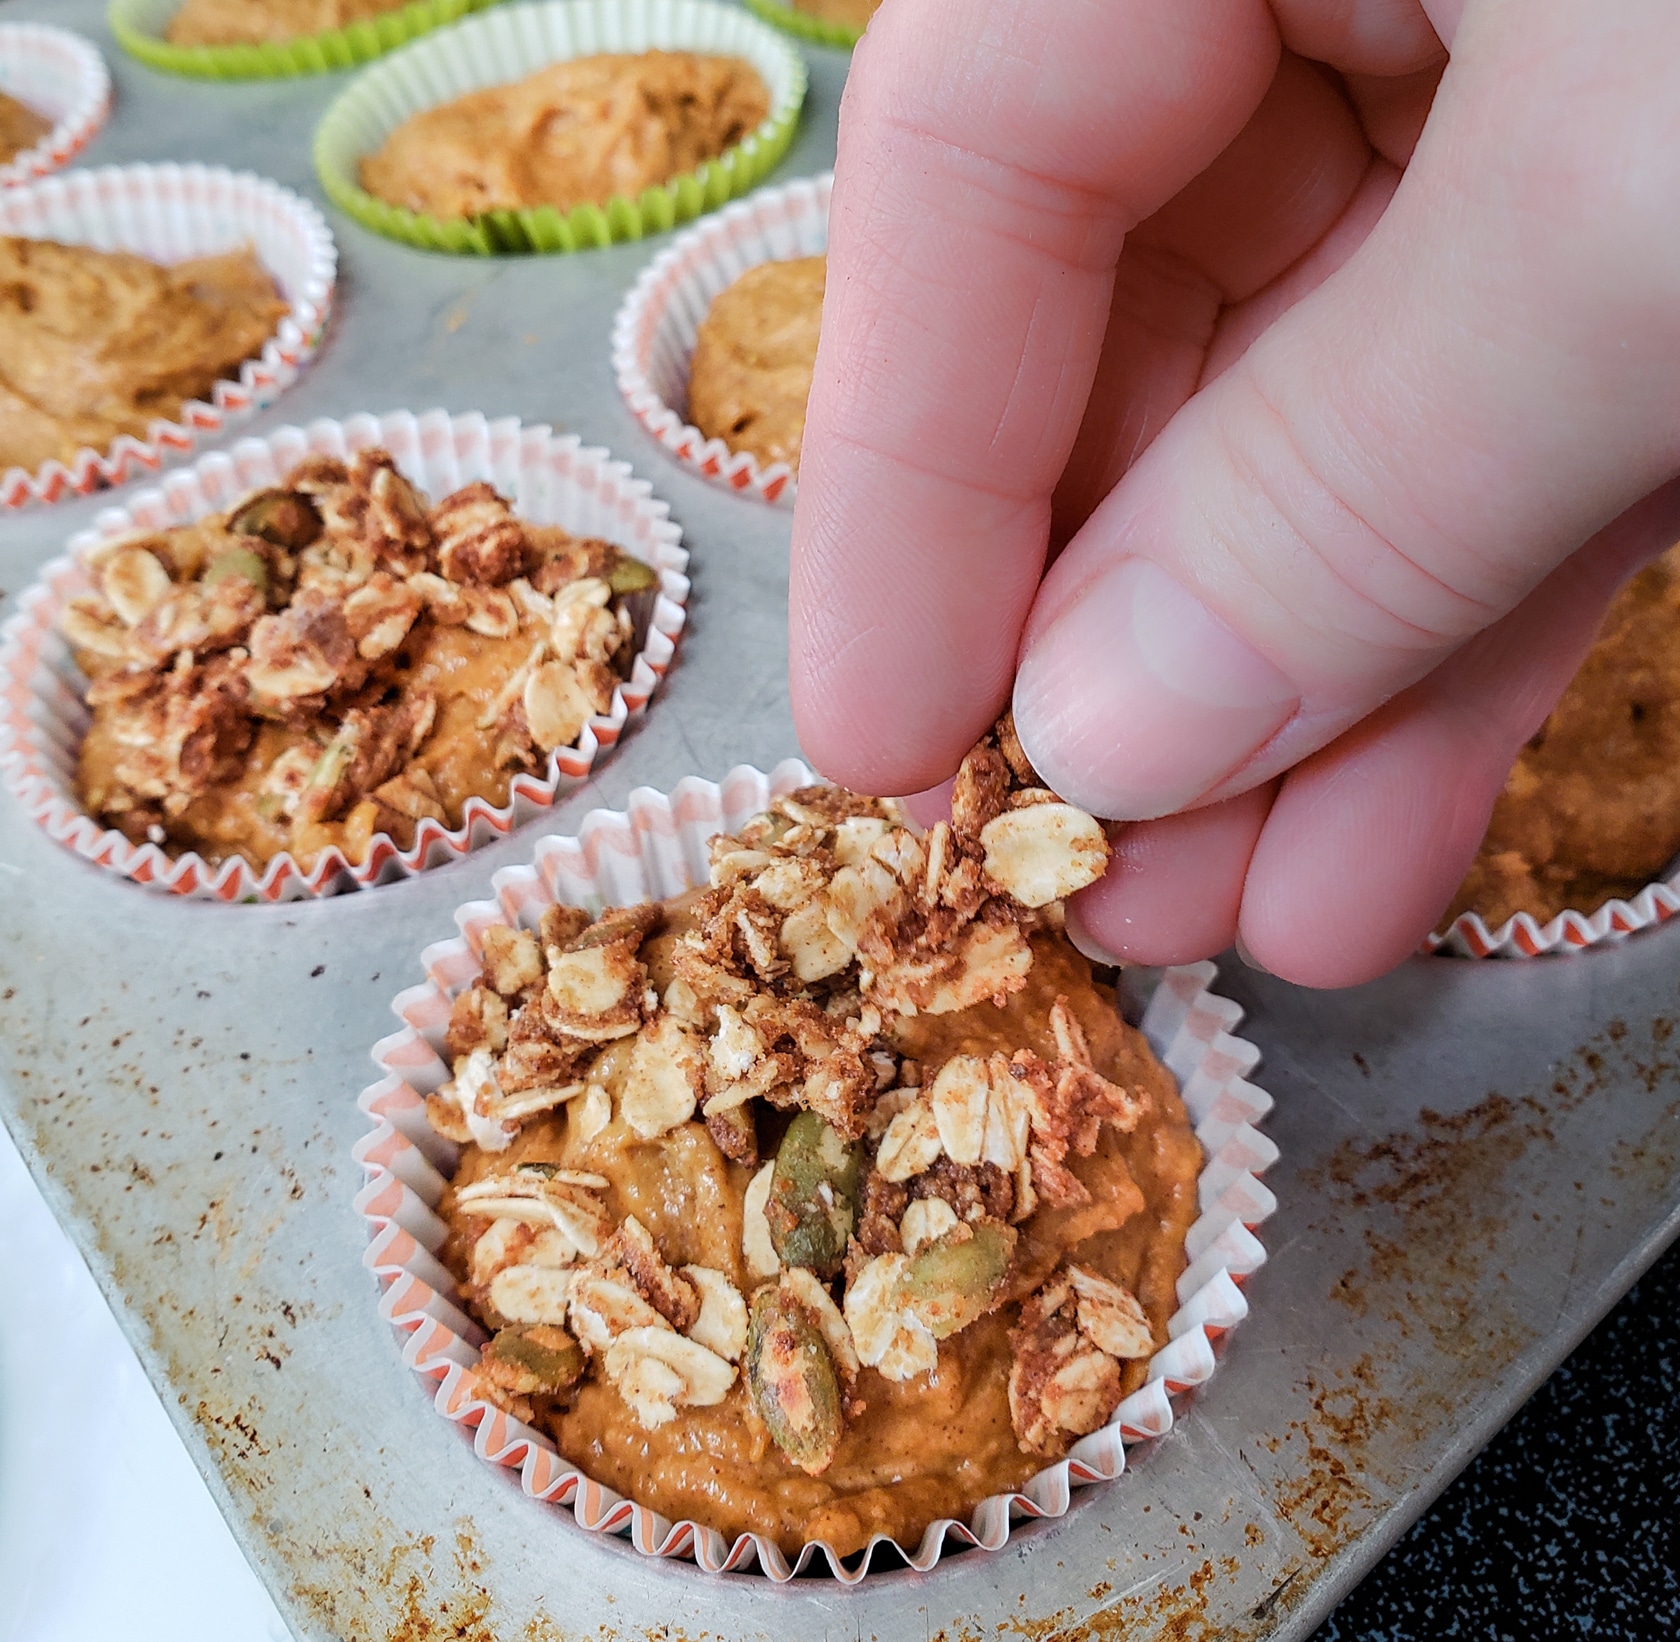 Fingers sprinkling crumb topping onto unbaked pumpkin muffins.